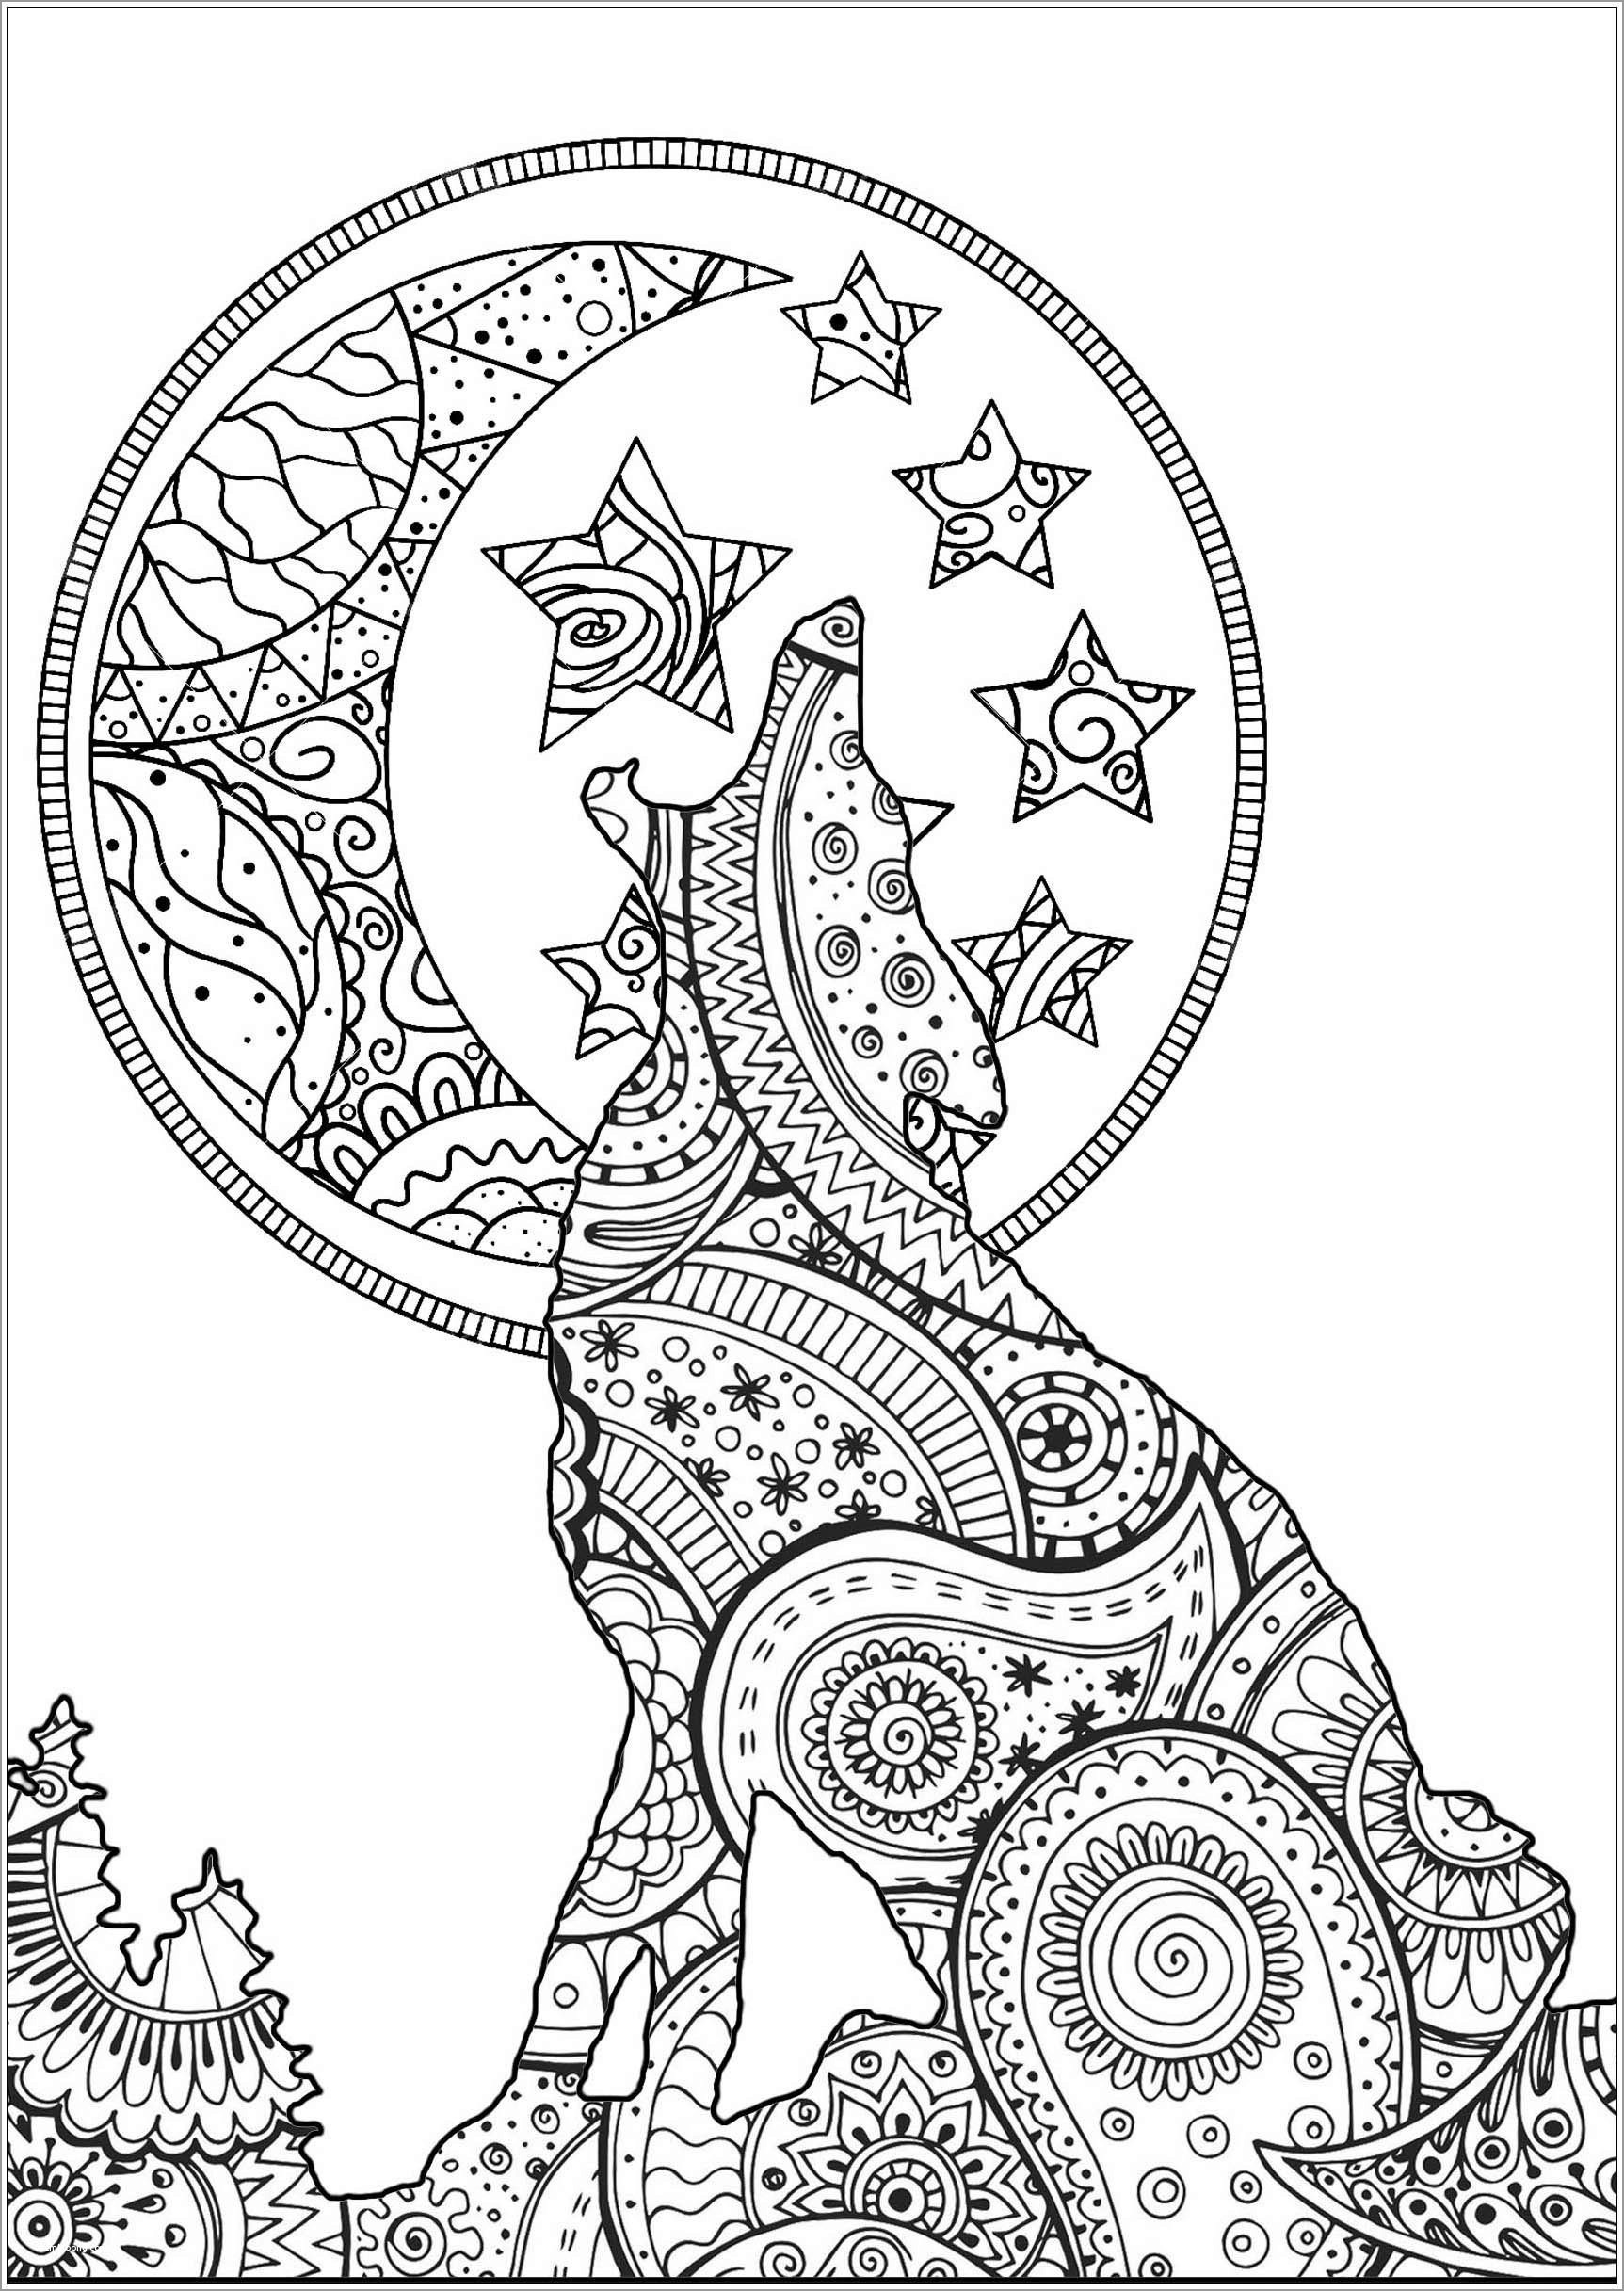 Zentangle Wolf Coloring Page for Adult